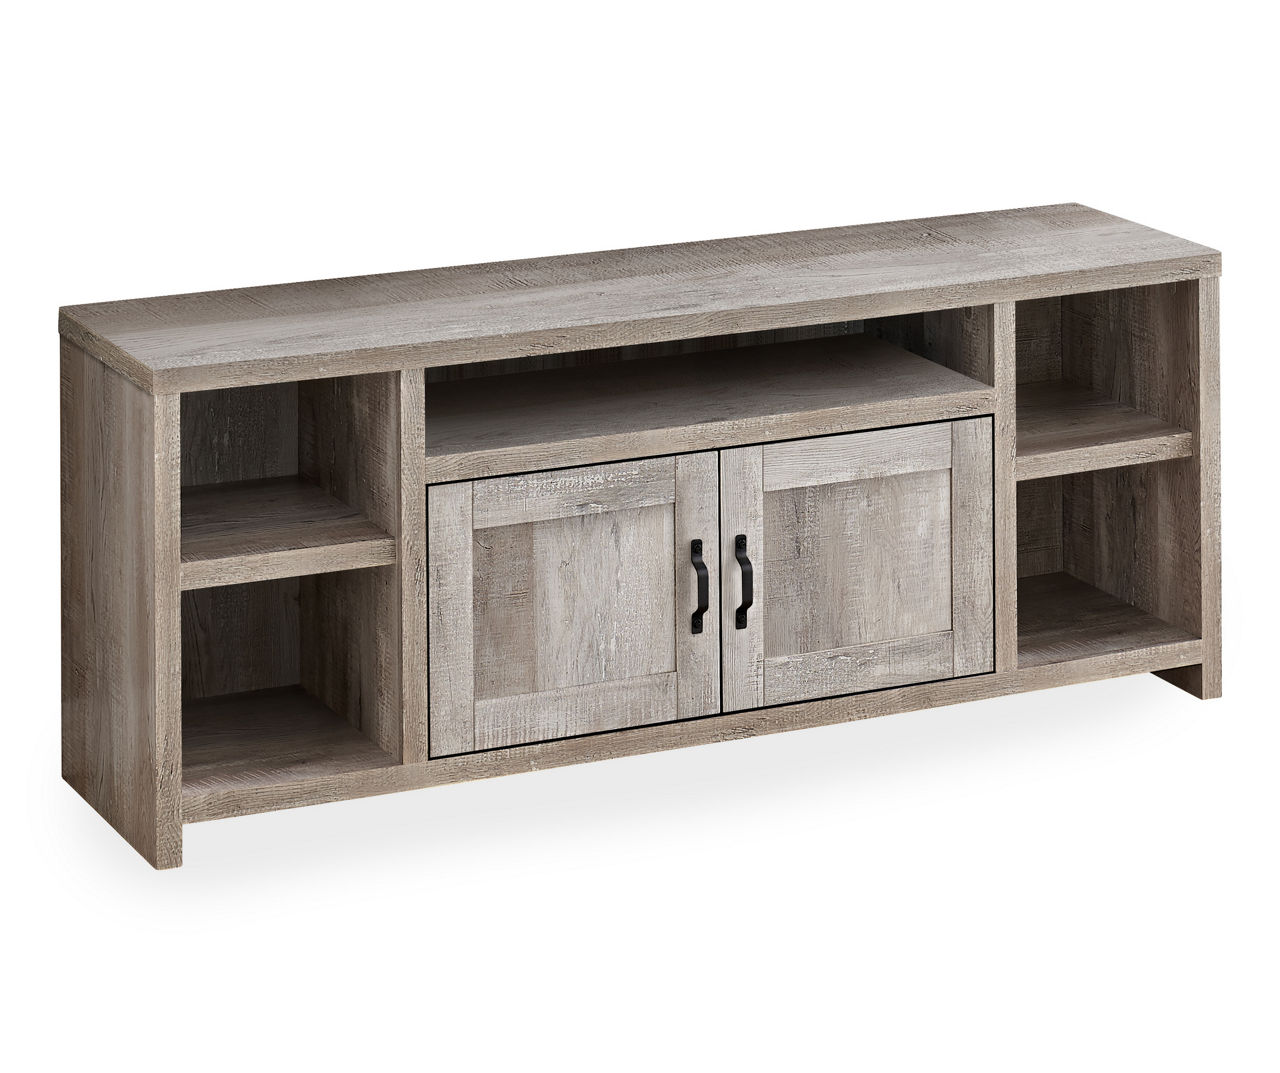 59" Taupe Wood Look 5-Shelf TV Stand